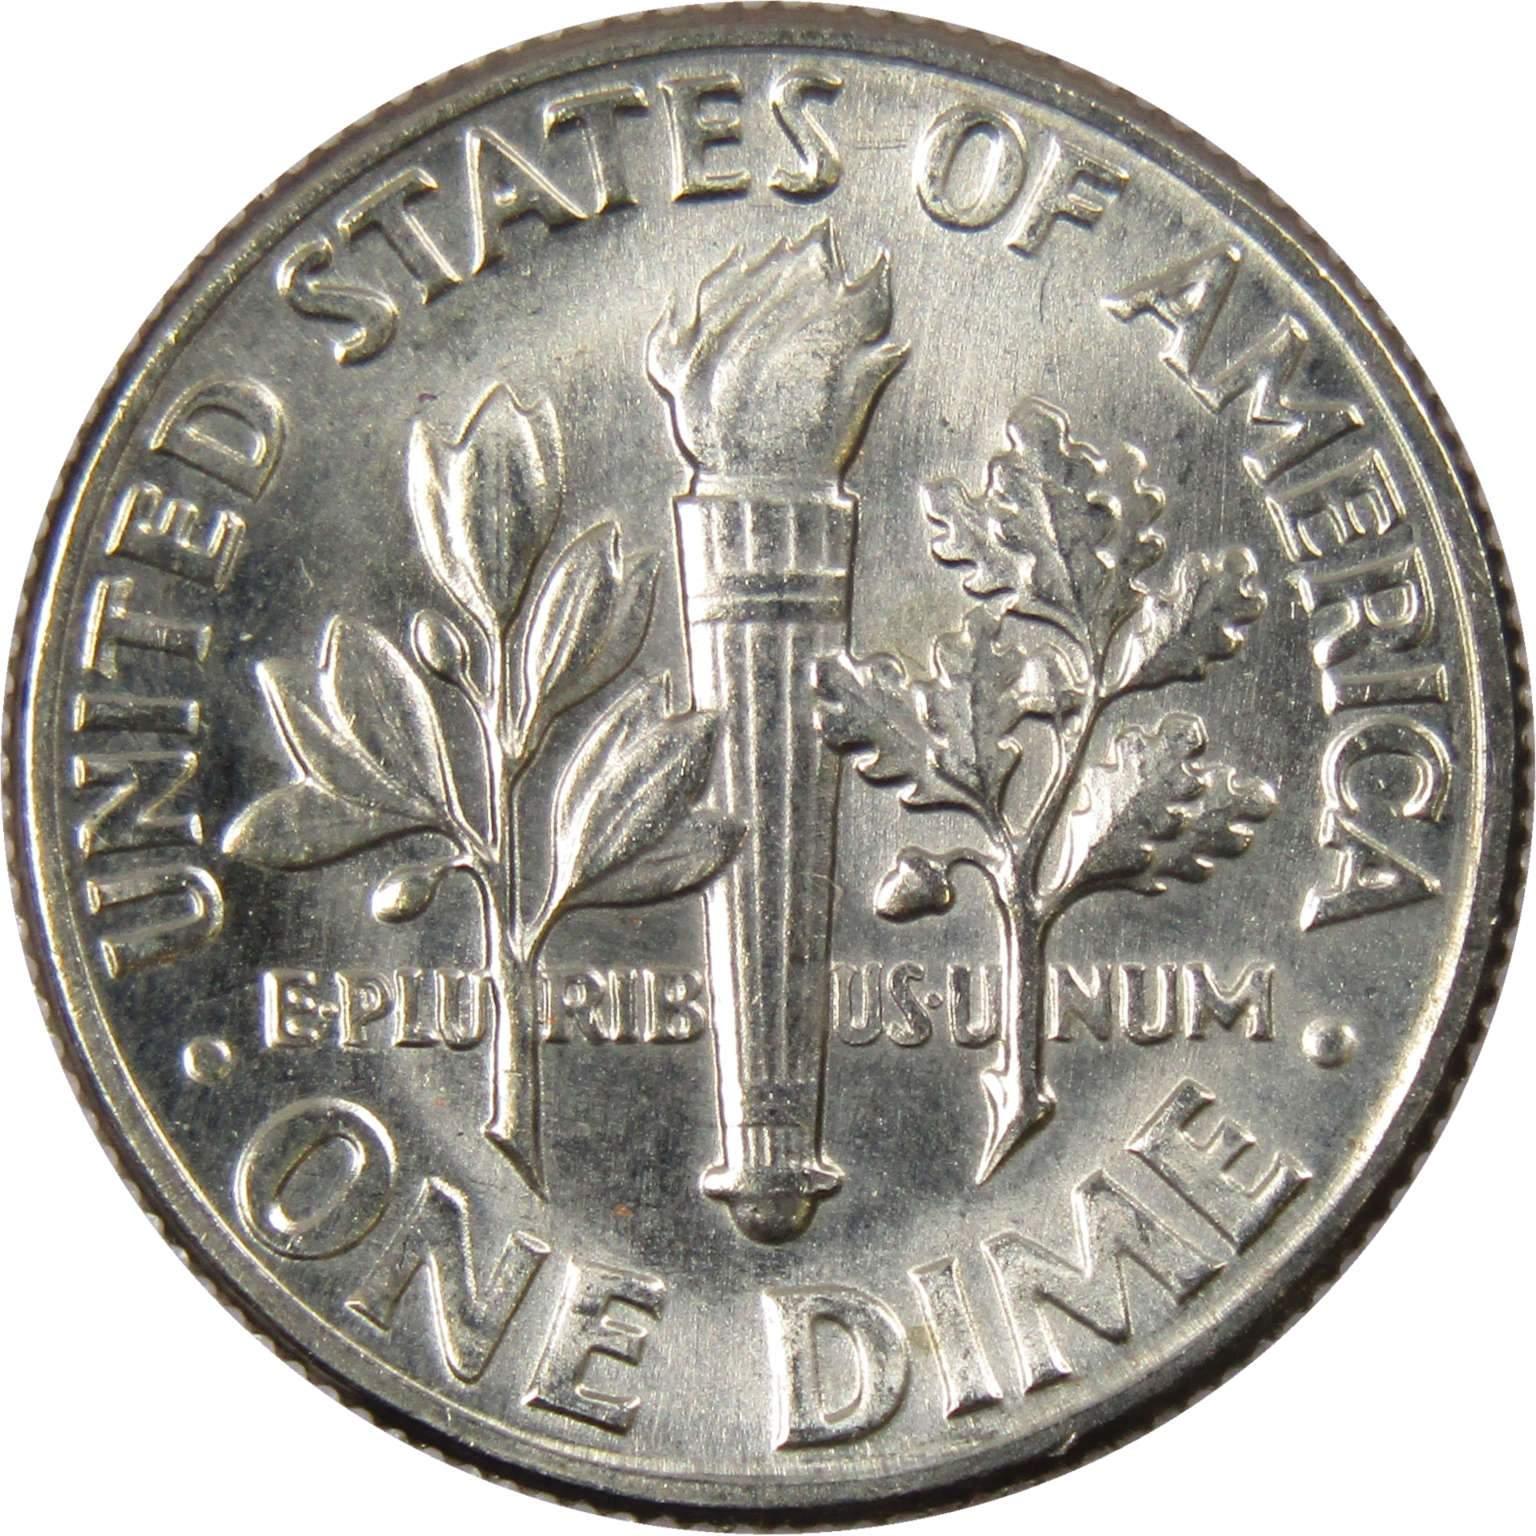 1972 D Roosevelt Dime BU Uncirculated Mint State 10c US Coin Collectible